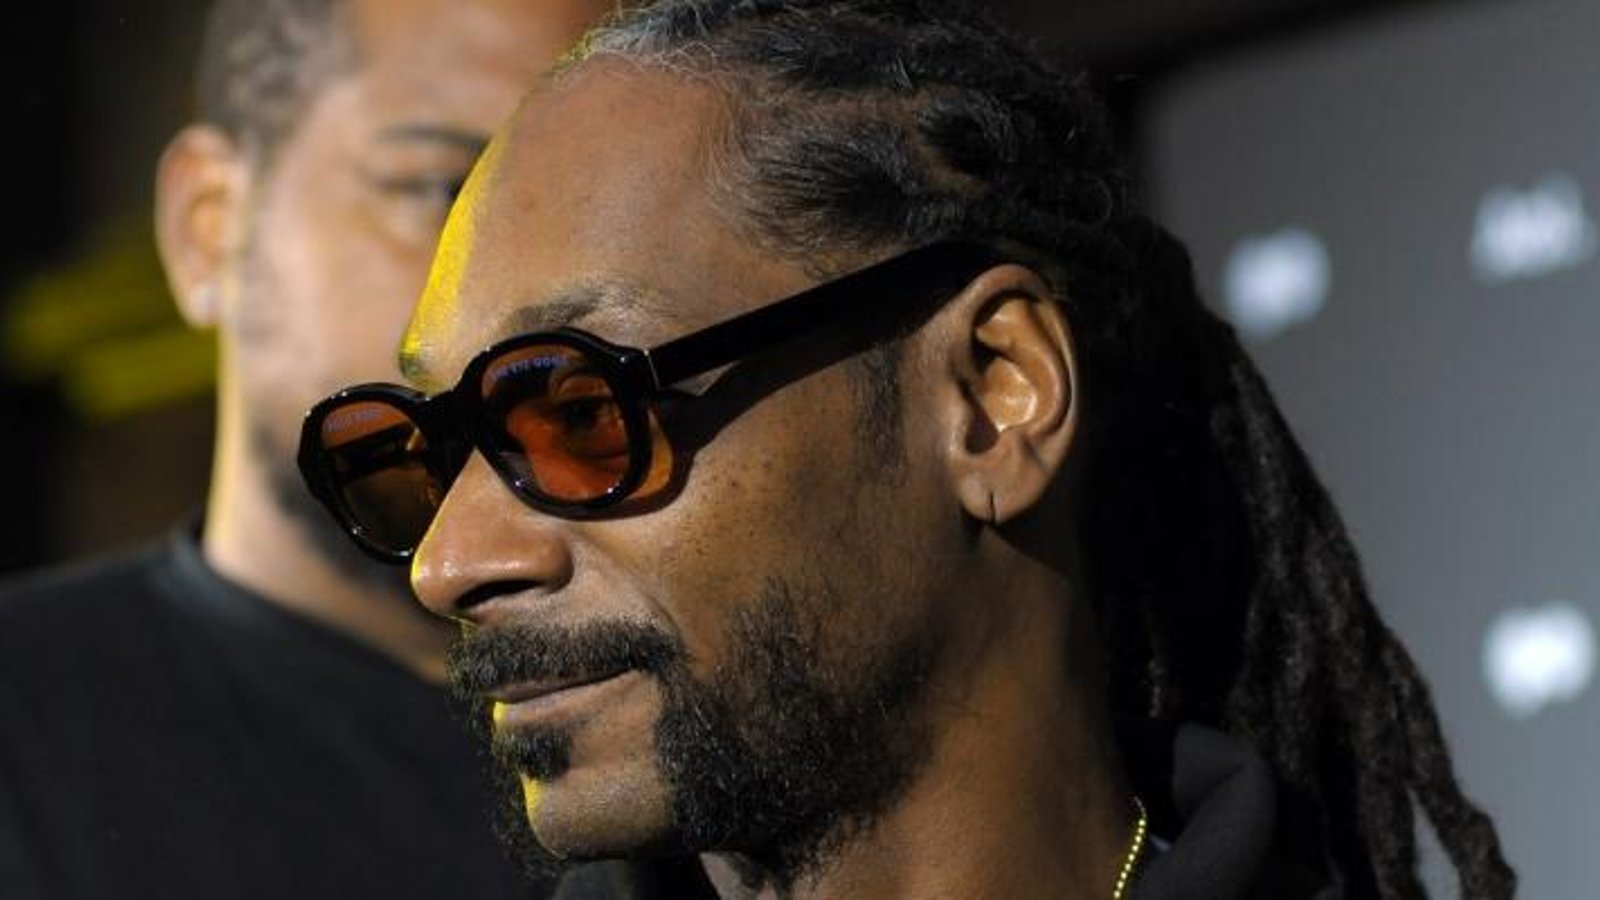 Snoop Dogg will go 1 on 1 against NHL star for charity.